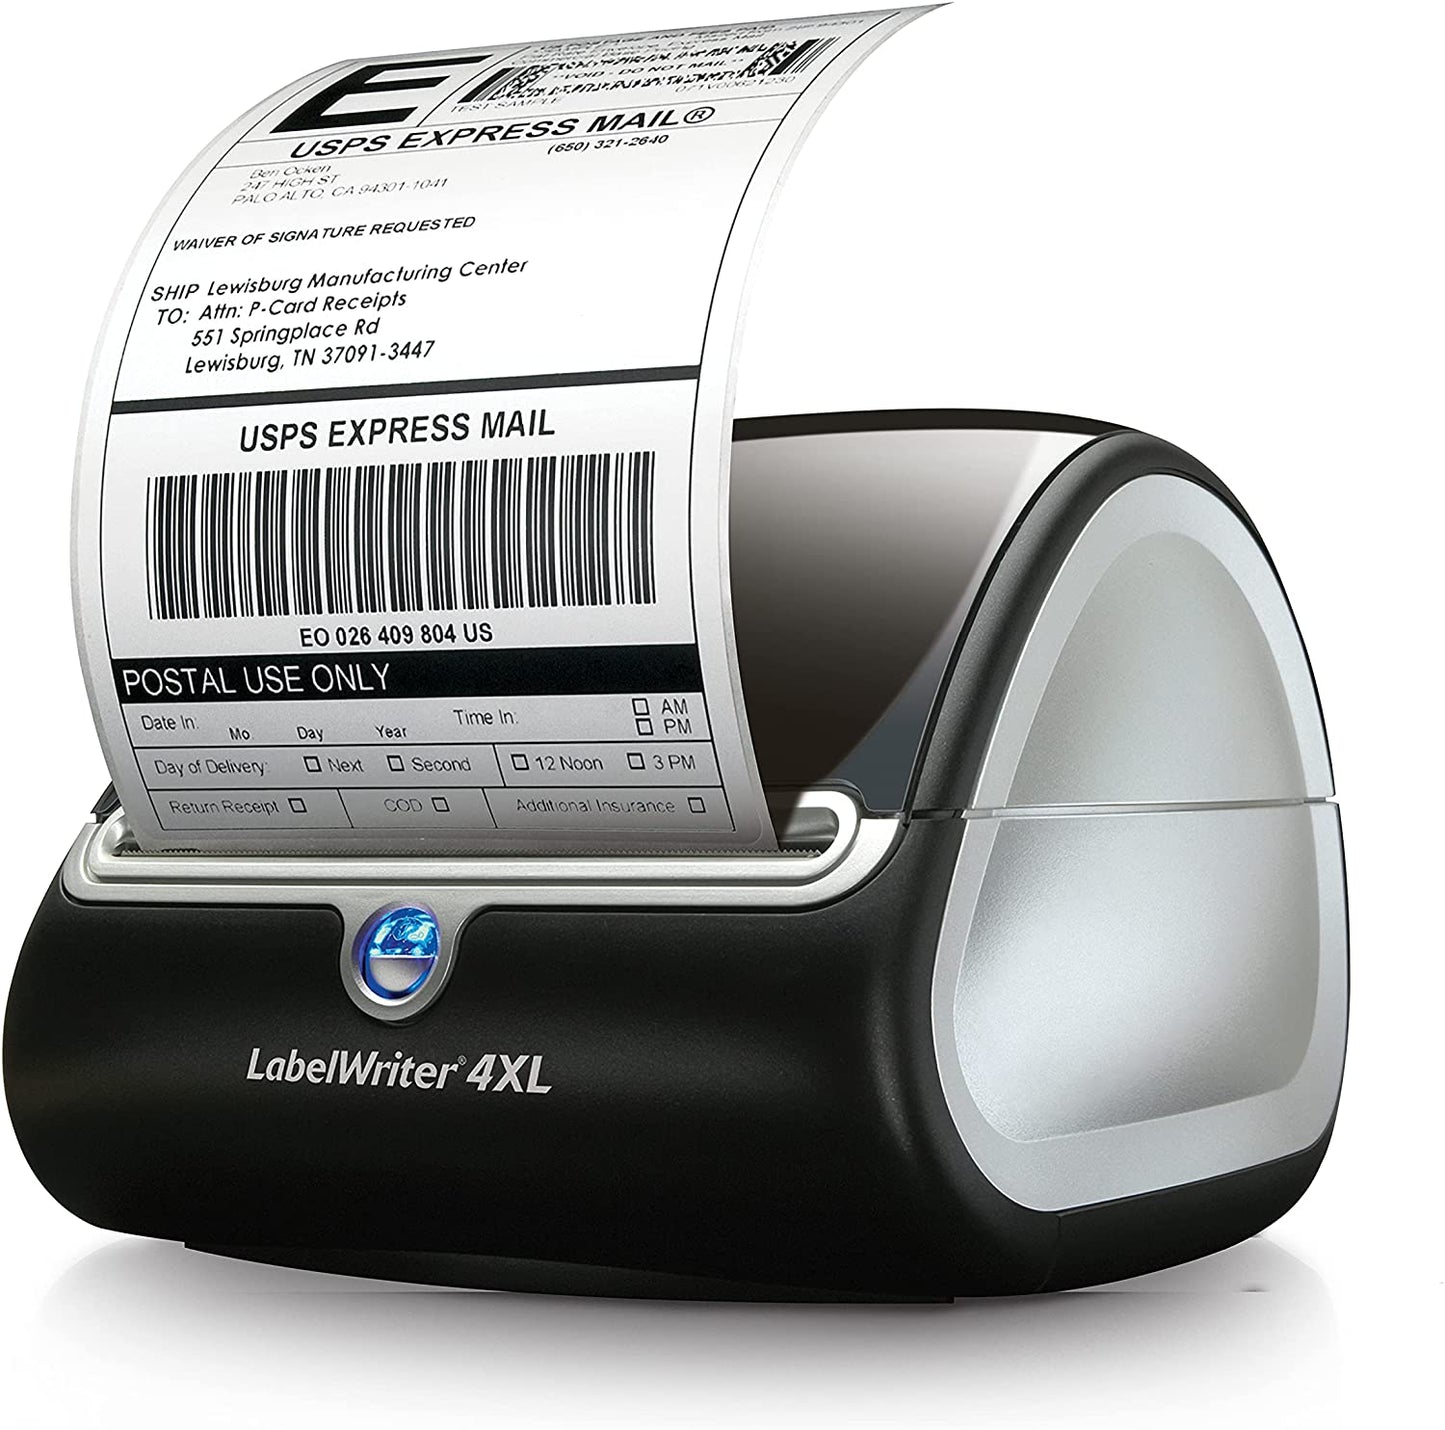 Dymo Wide Format 4XL Label Writer No Need Ink with up to 53 standard 4-line Address Label Printer